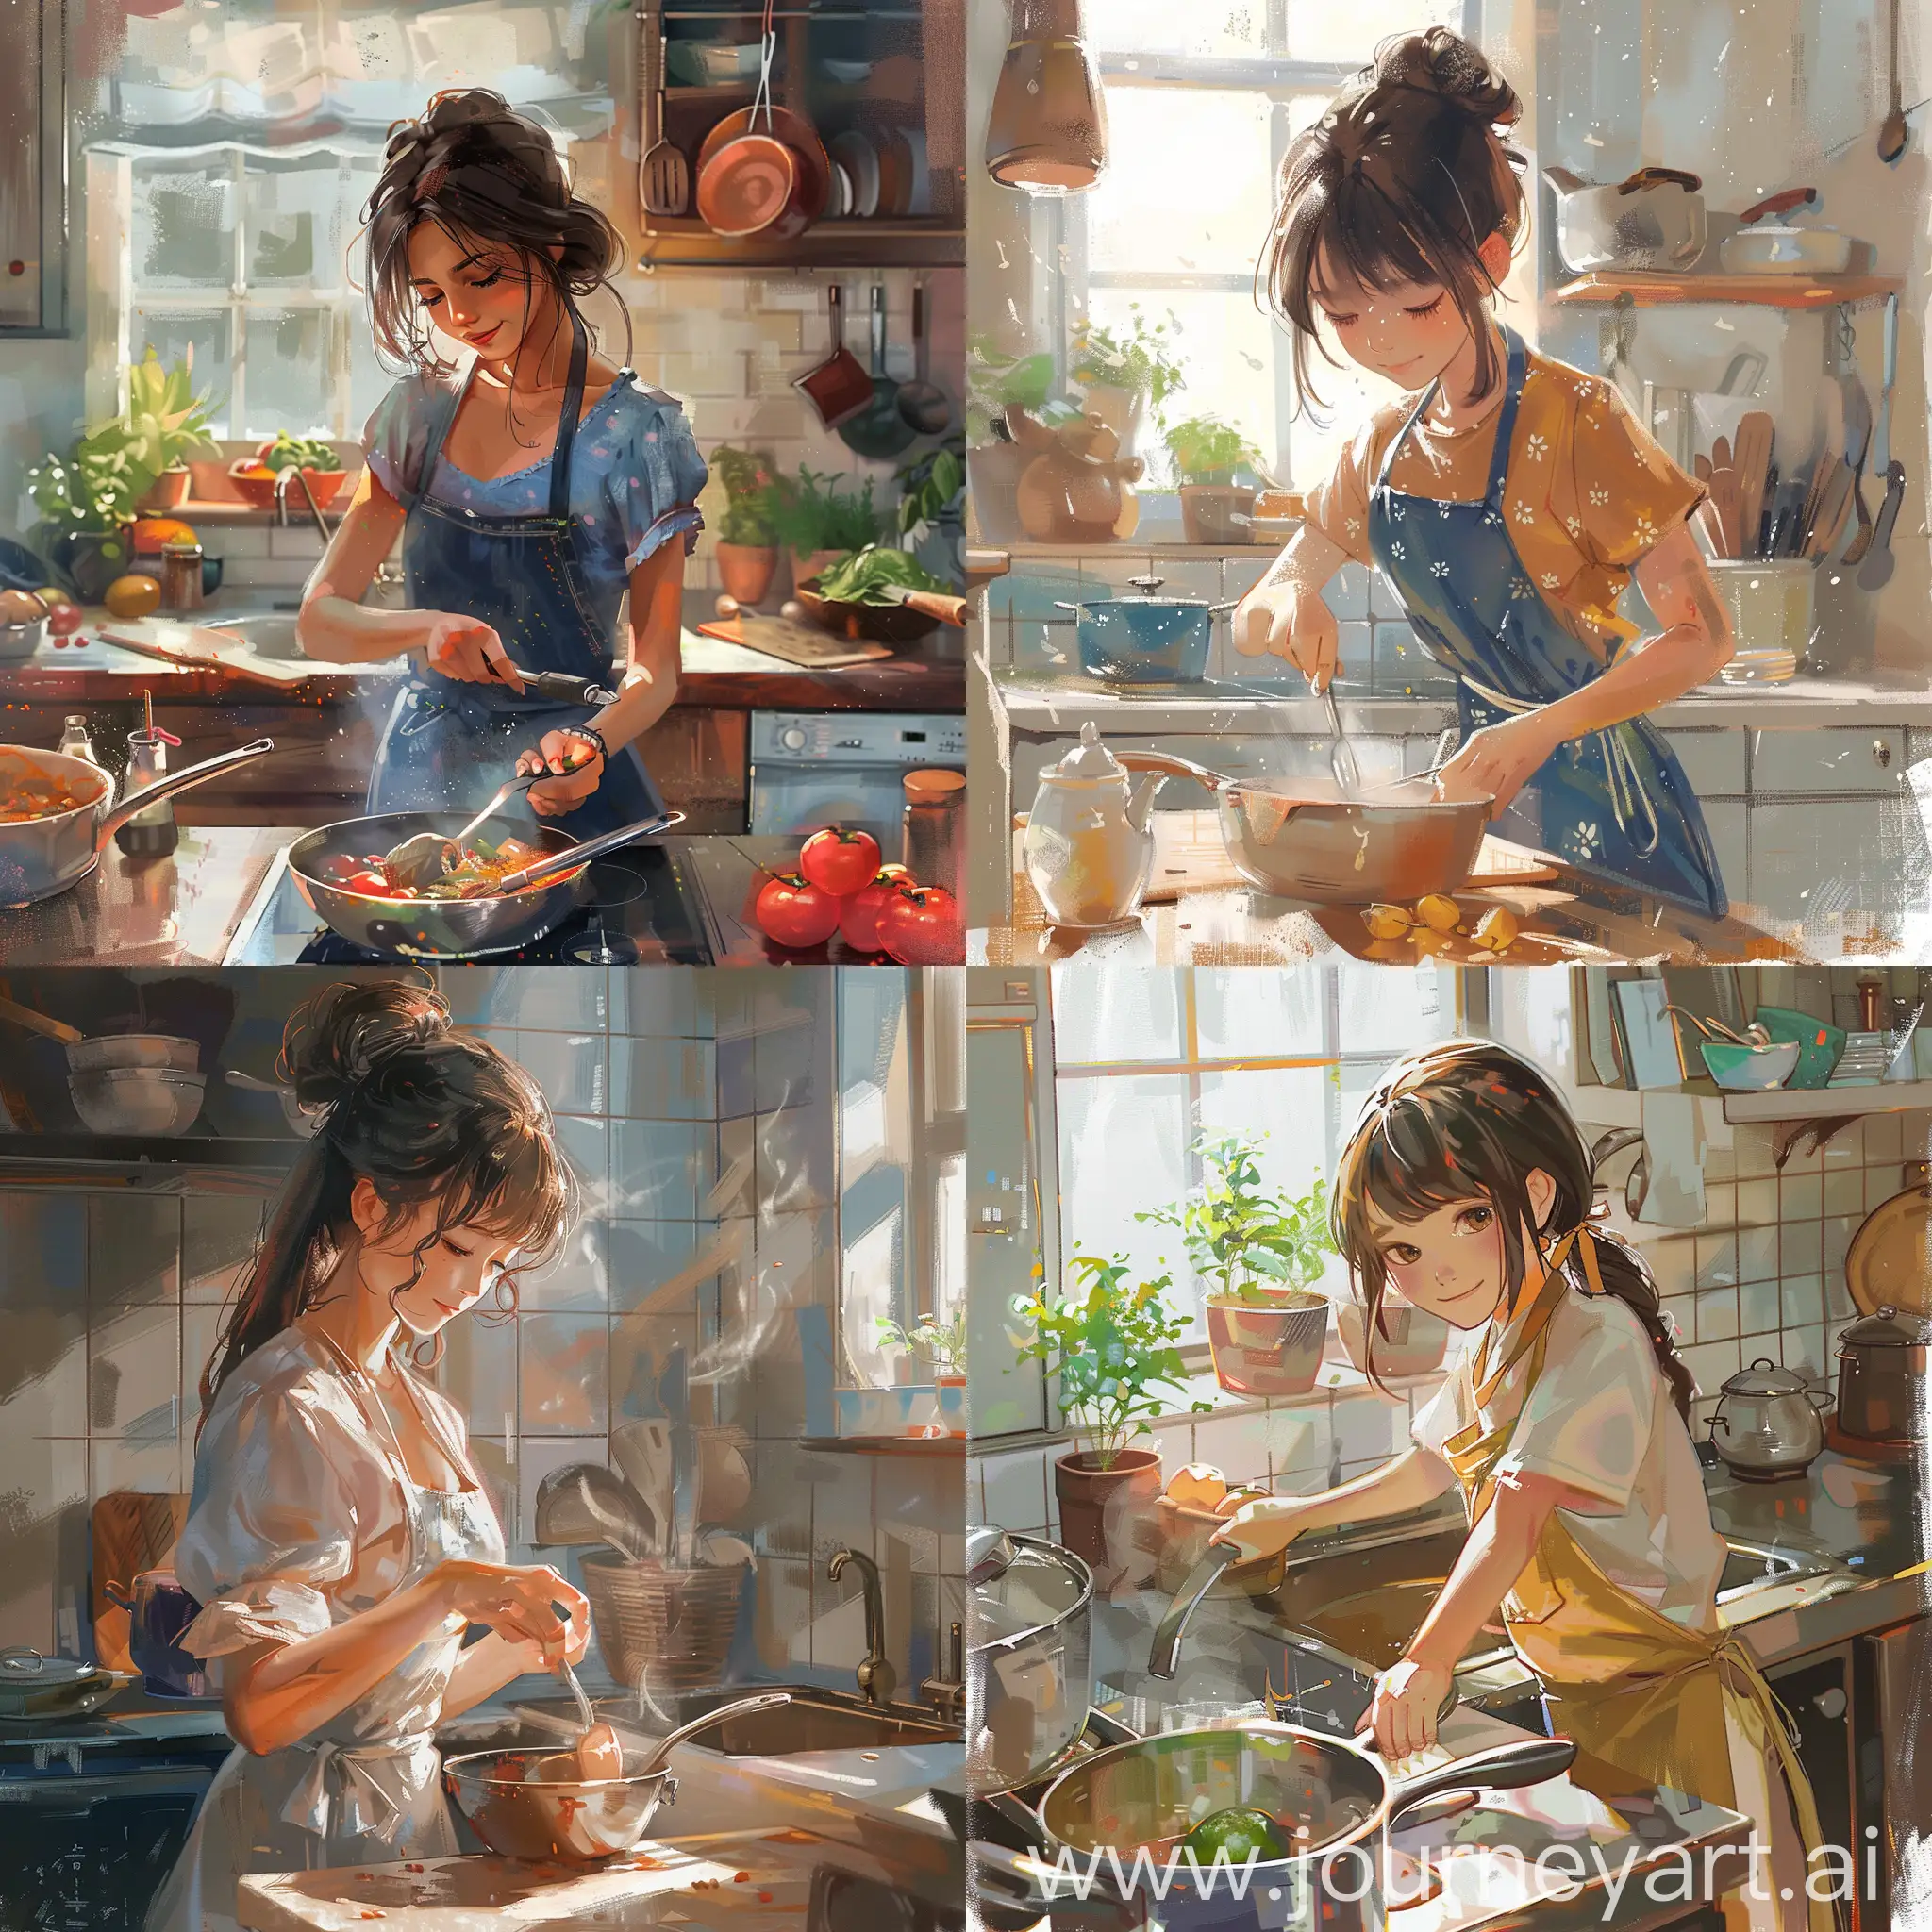 Adorable-Young-Girl-Cooking-in-a-Bright-Kitchen